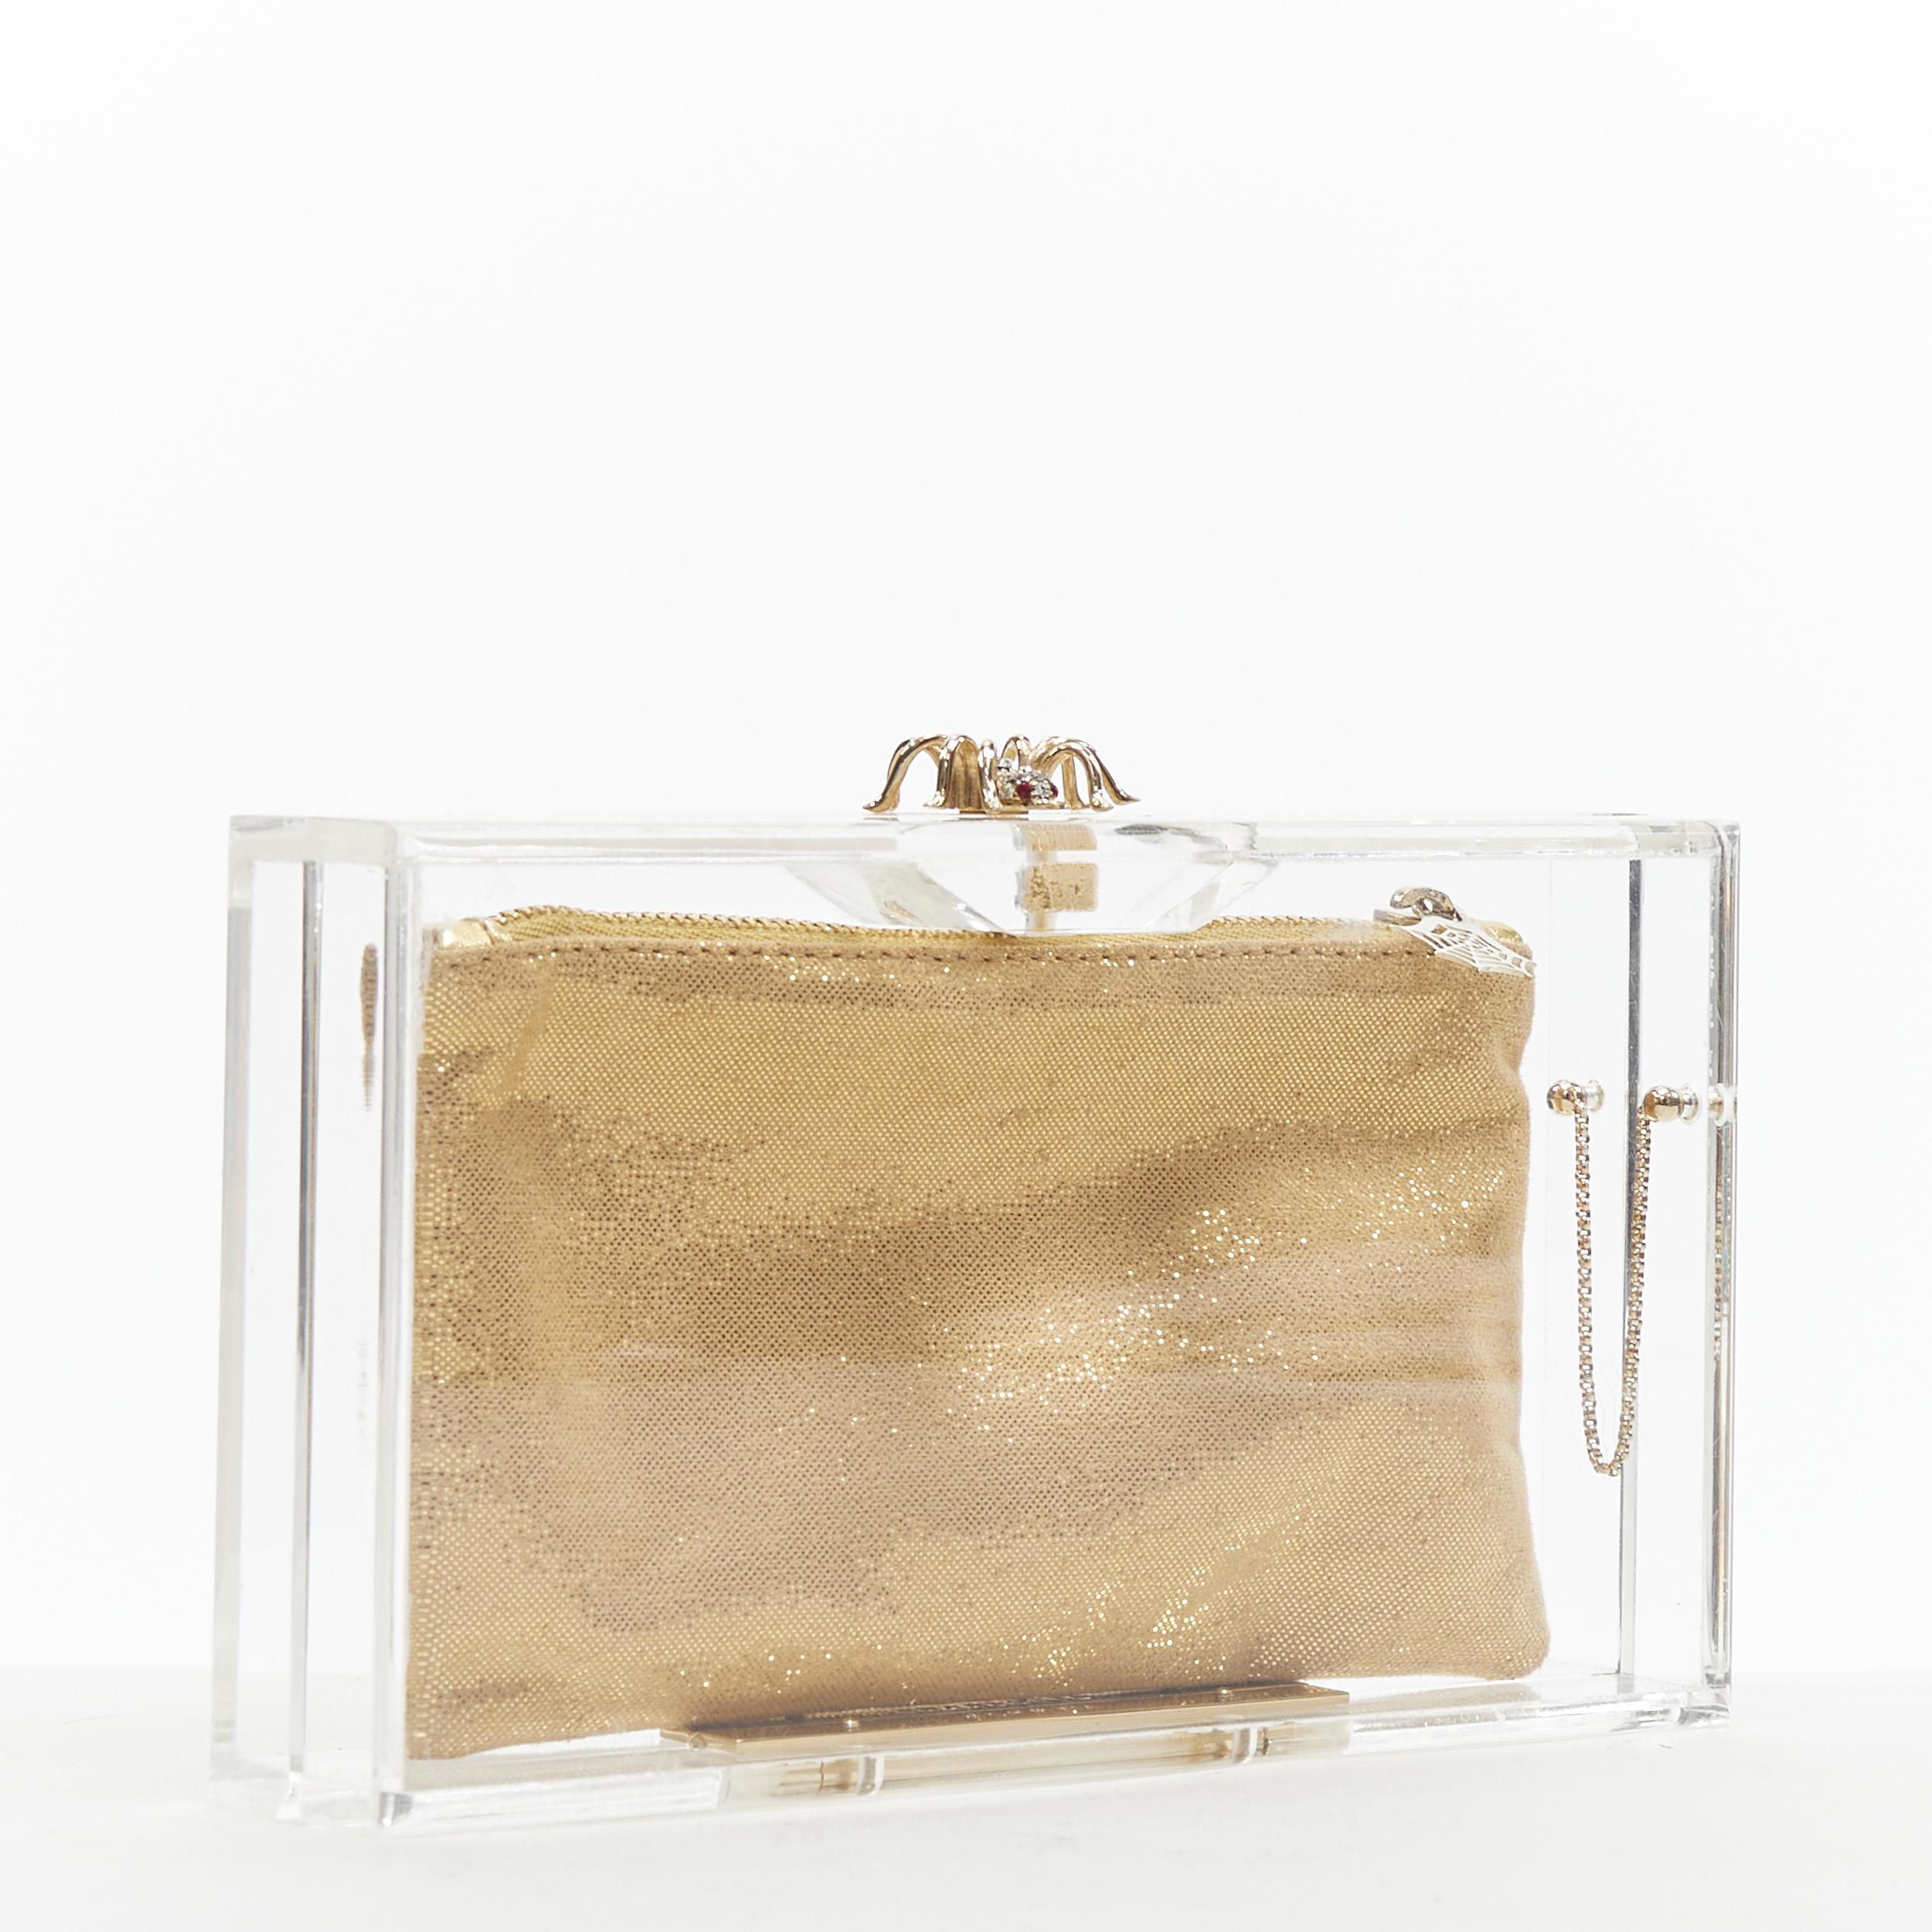 new CHARLOTTE OLYMPIA Pandora crystal spider clear perspex PVC box clutch Reference: TGAS/B00751 
Brand: Charlotte Olympia 
Model: Pandora box clutch 
Material: Plastic 
Extra Detail: Comes with 3 interchangeable pouch lining 

CONDITION: